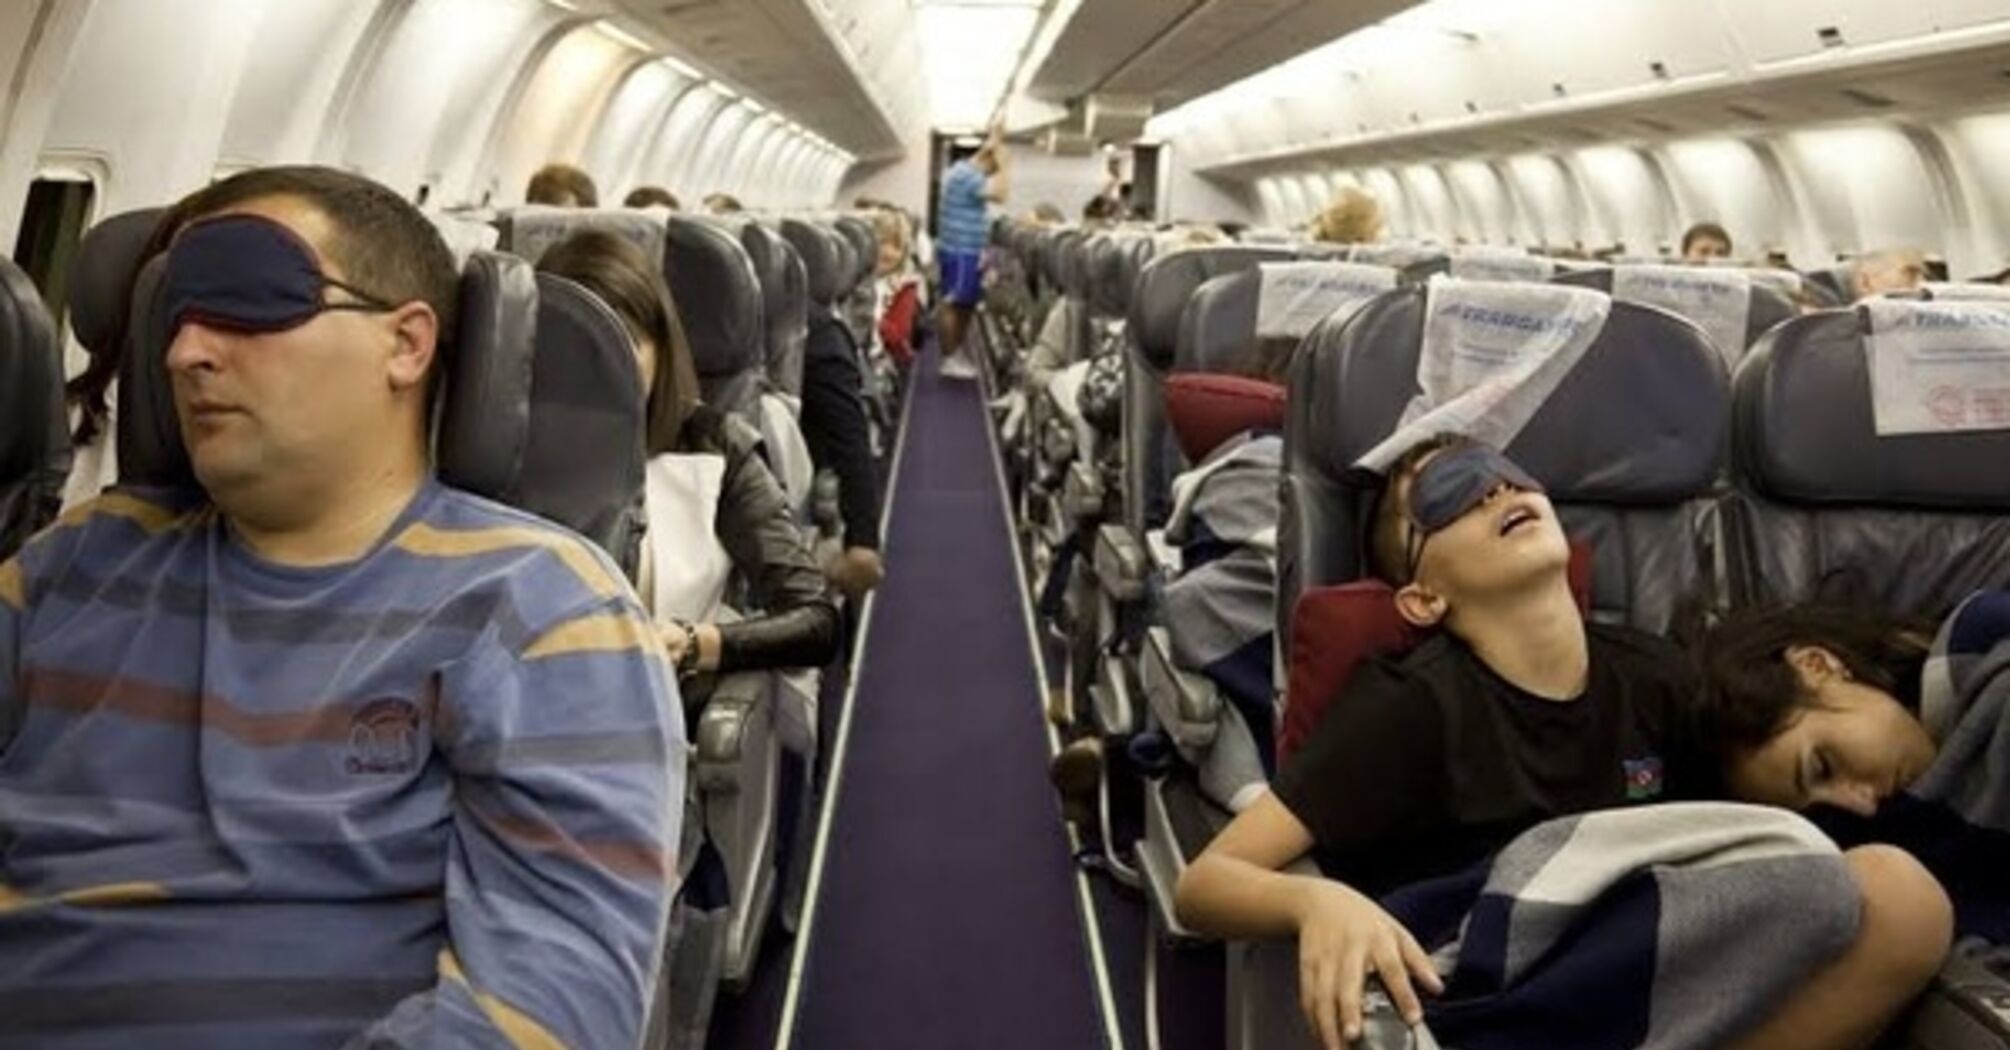 A clever passenger came up with a way to lie down and sleep in economy class